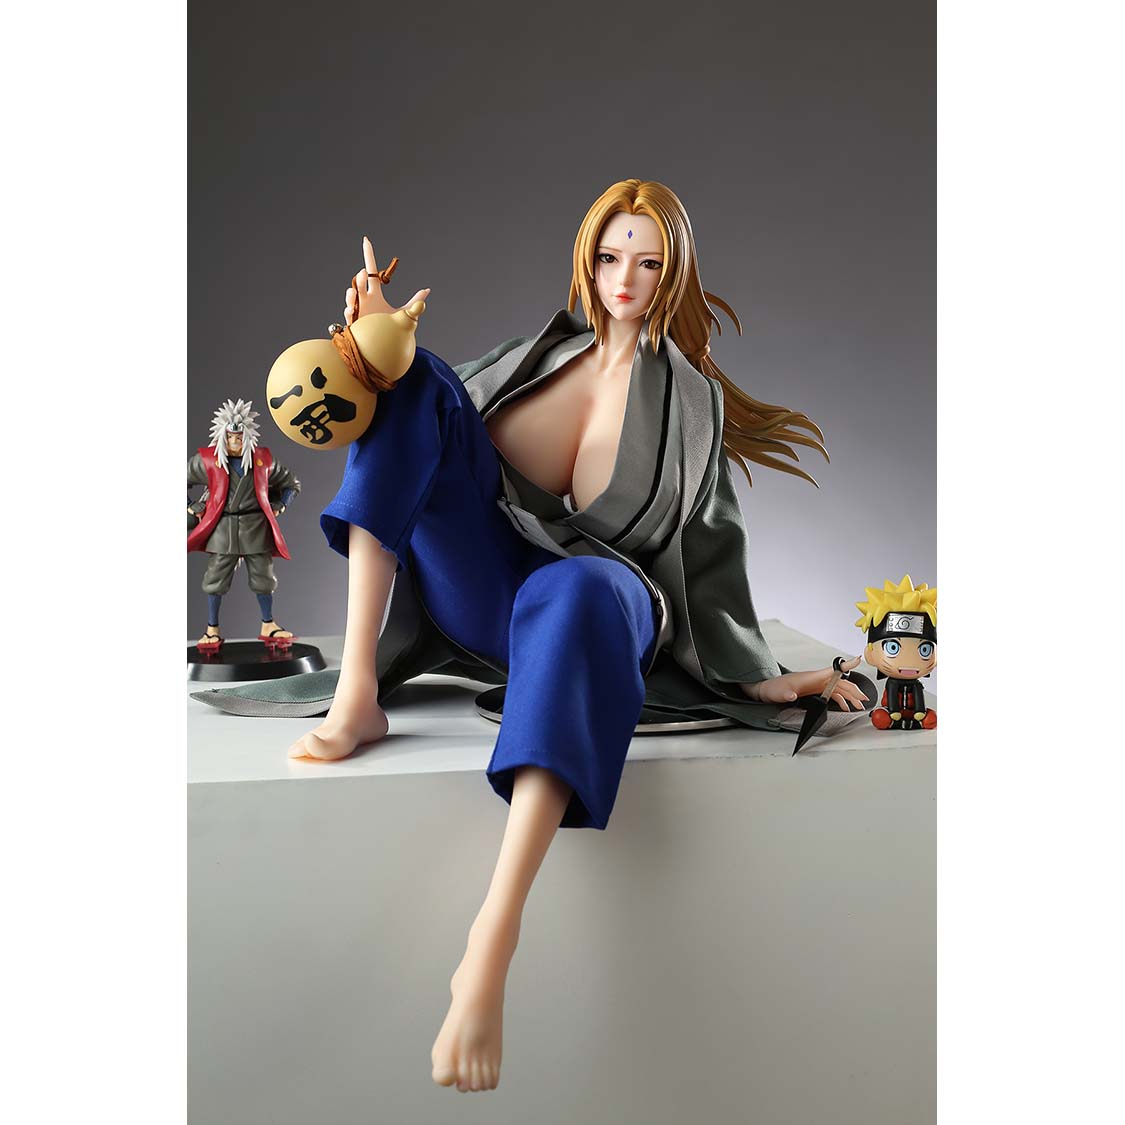 2ft 01in 65cm mini silicone anime sex doll with blonde hair, light skin and very large breasts.  Made by AF Doll.